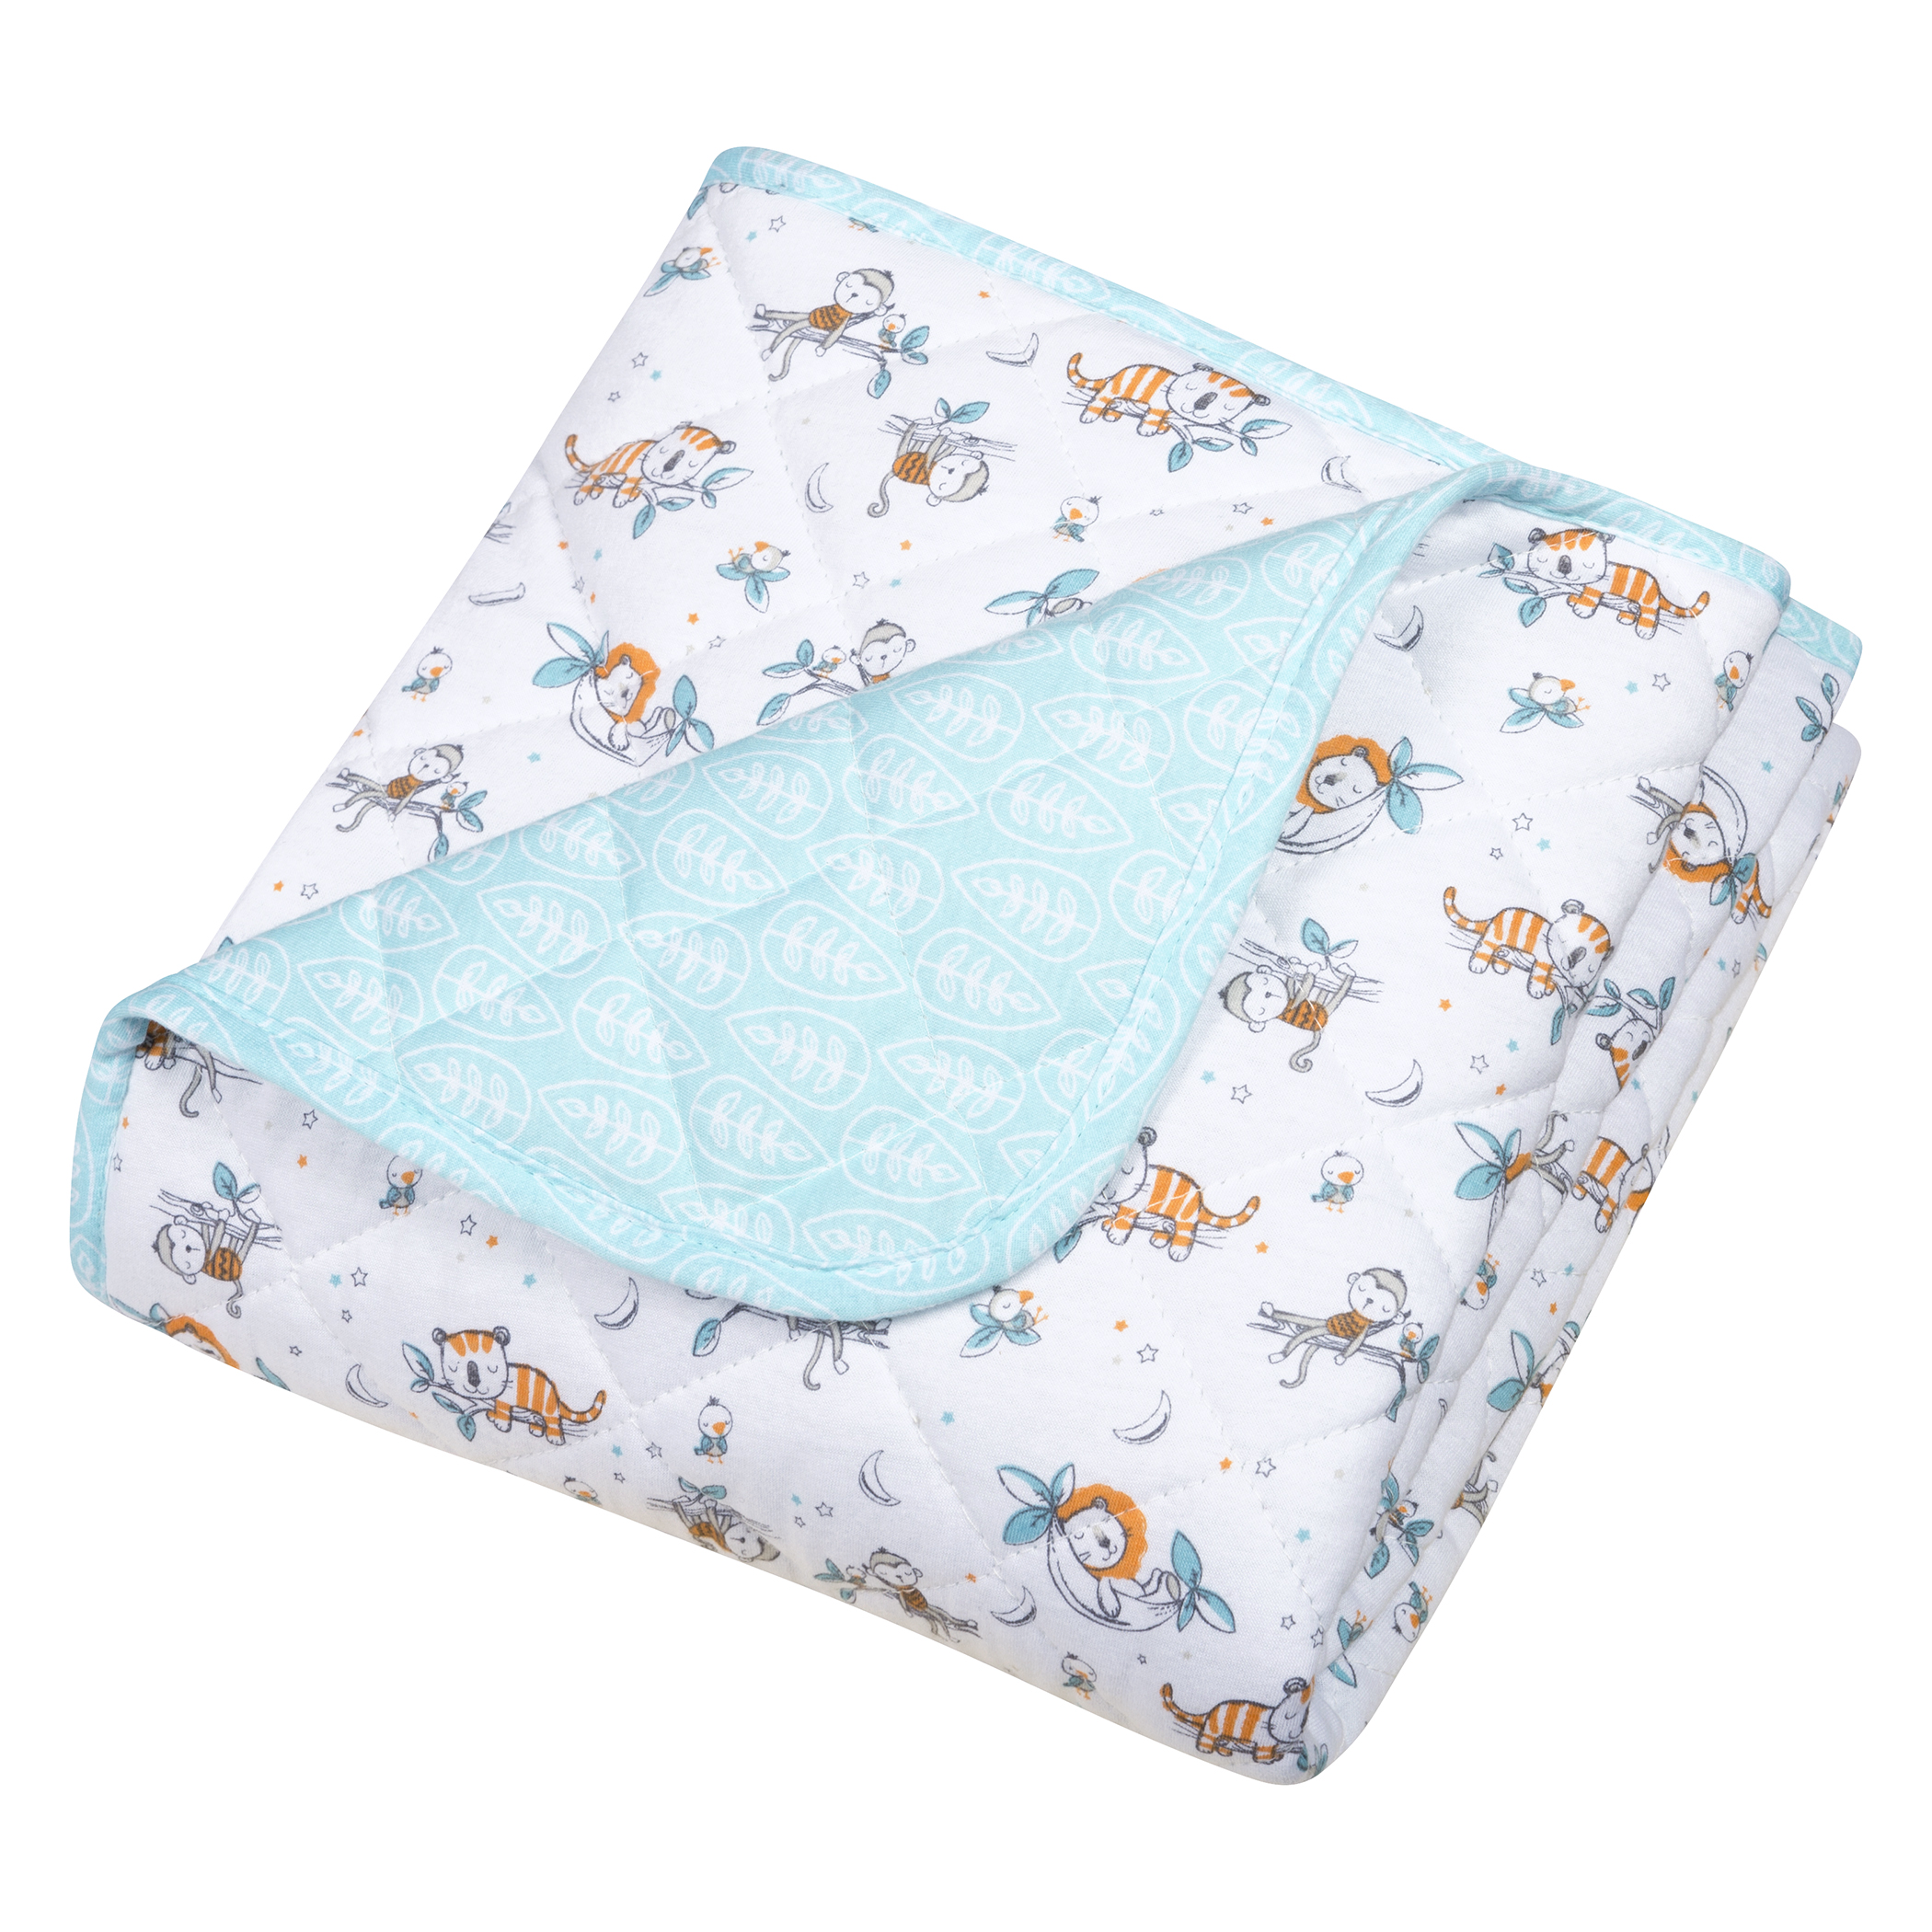 Teal Blanket Quilt for Tummy Time Naps /& Play Time